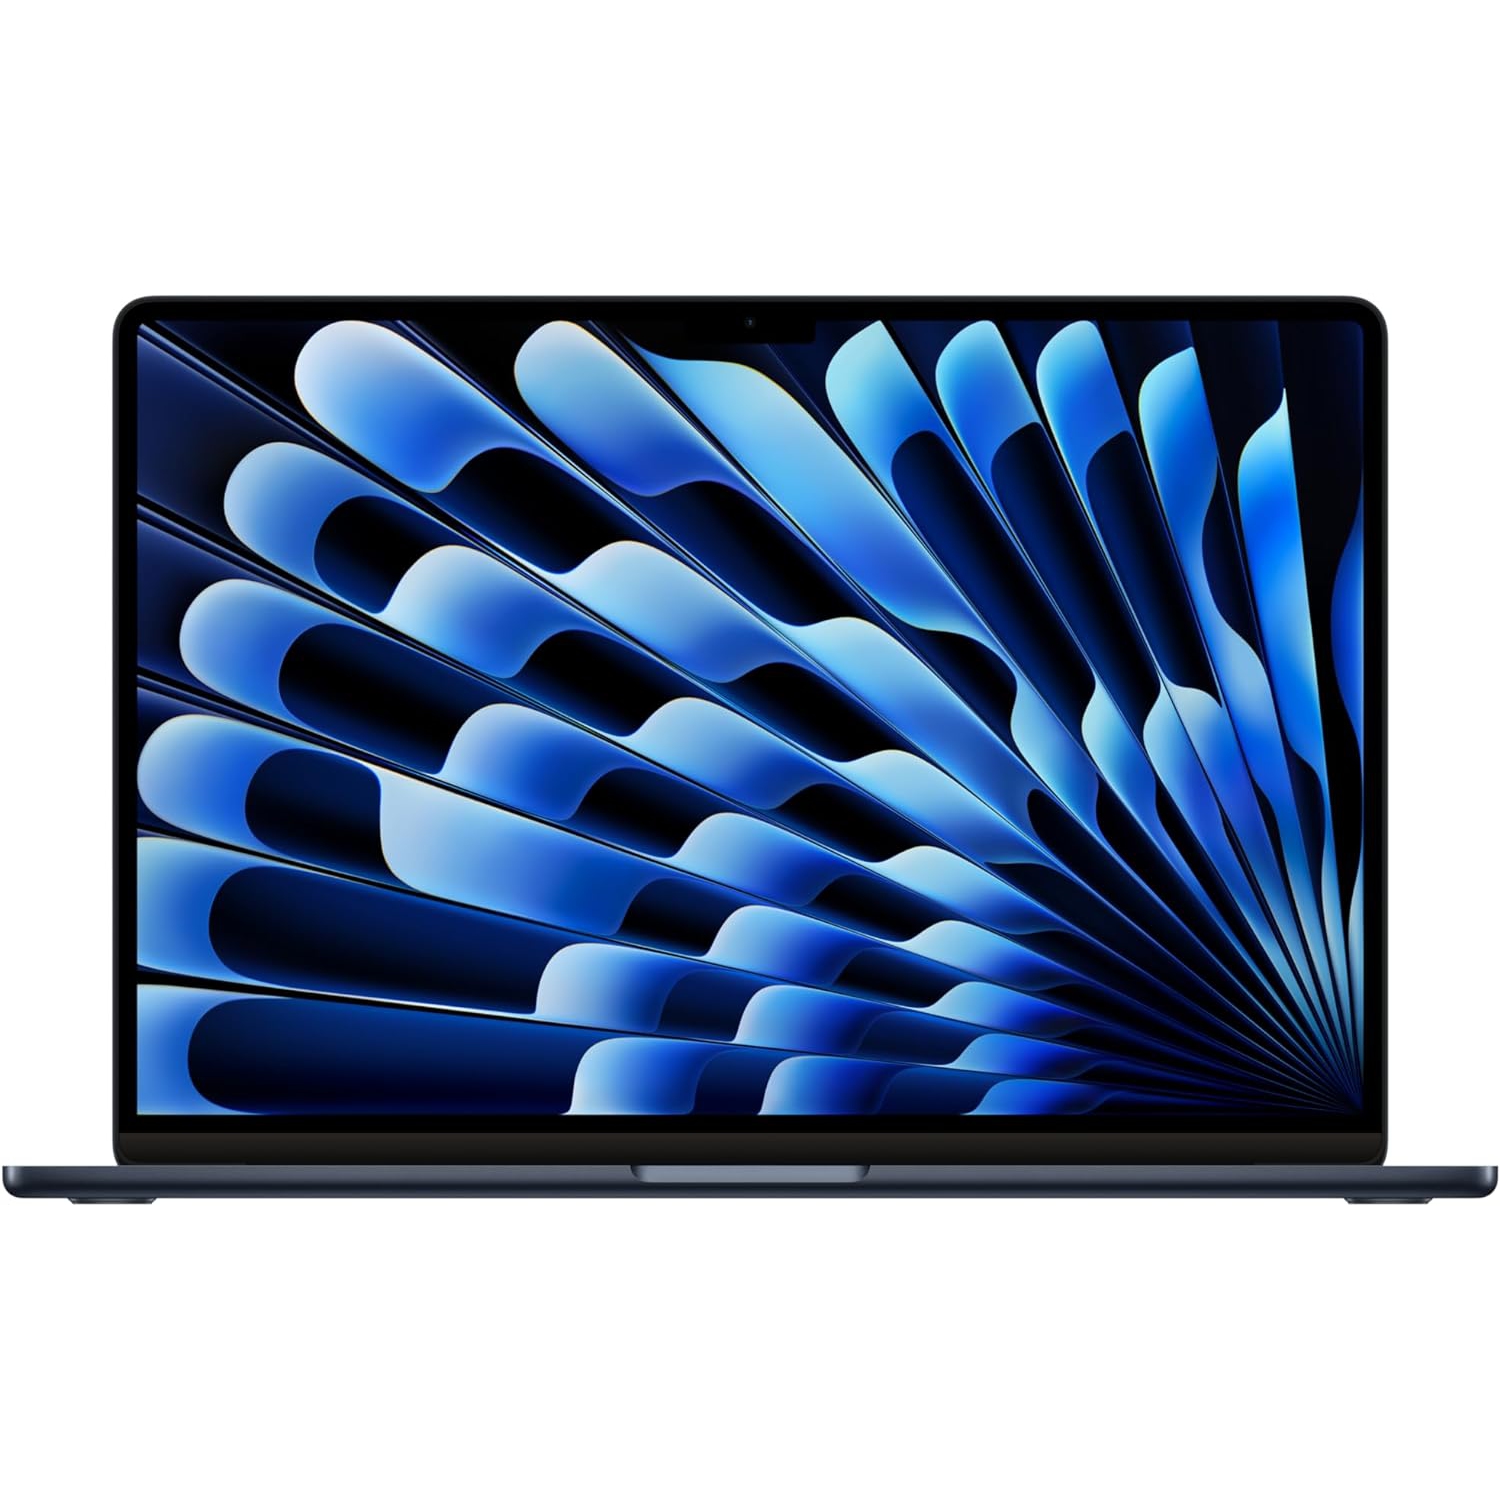 refurbished (Excellent )- Apple MacBook Pro (14-inch, Apple M1 Pro chip with, 16GB RAM, 1 TB SSD) - Space Grey